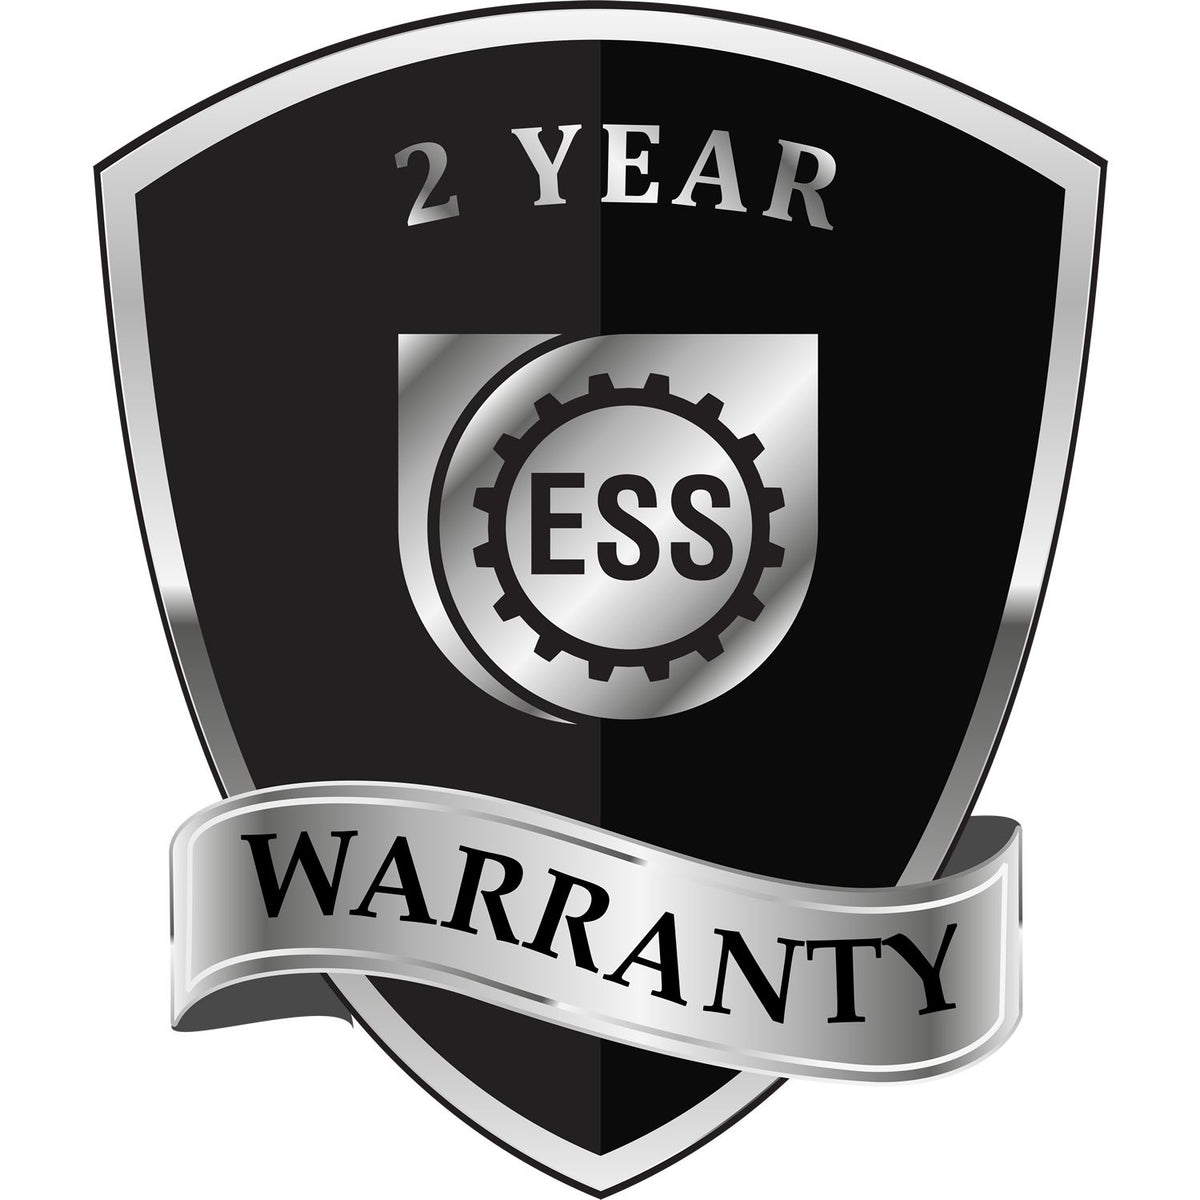 A badge or emblem showing a warranty icon for the Heavy Duty Cast Iron Colorado Architect Embosser